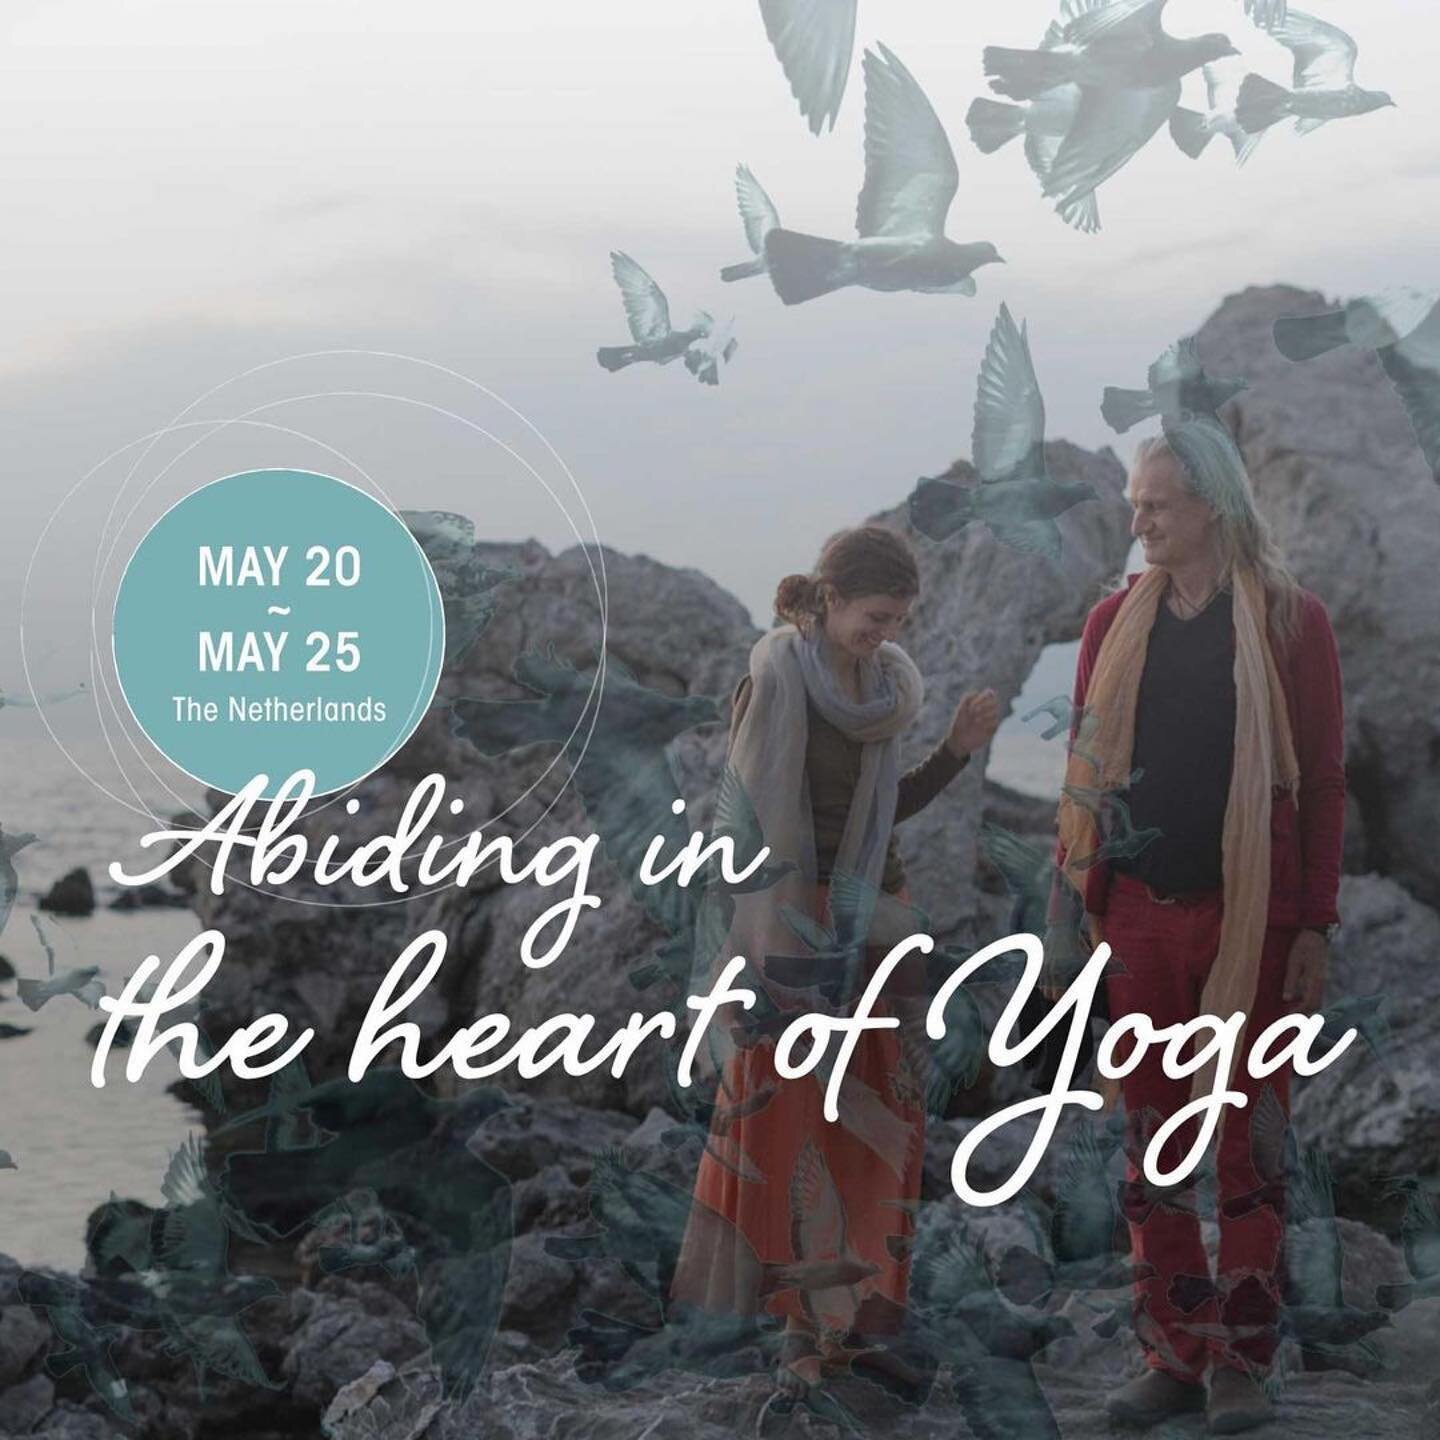 ❤️🙏
The heart of Yoga is in the Netherlands. @landofnow